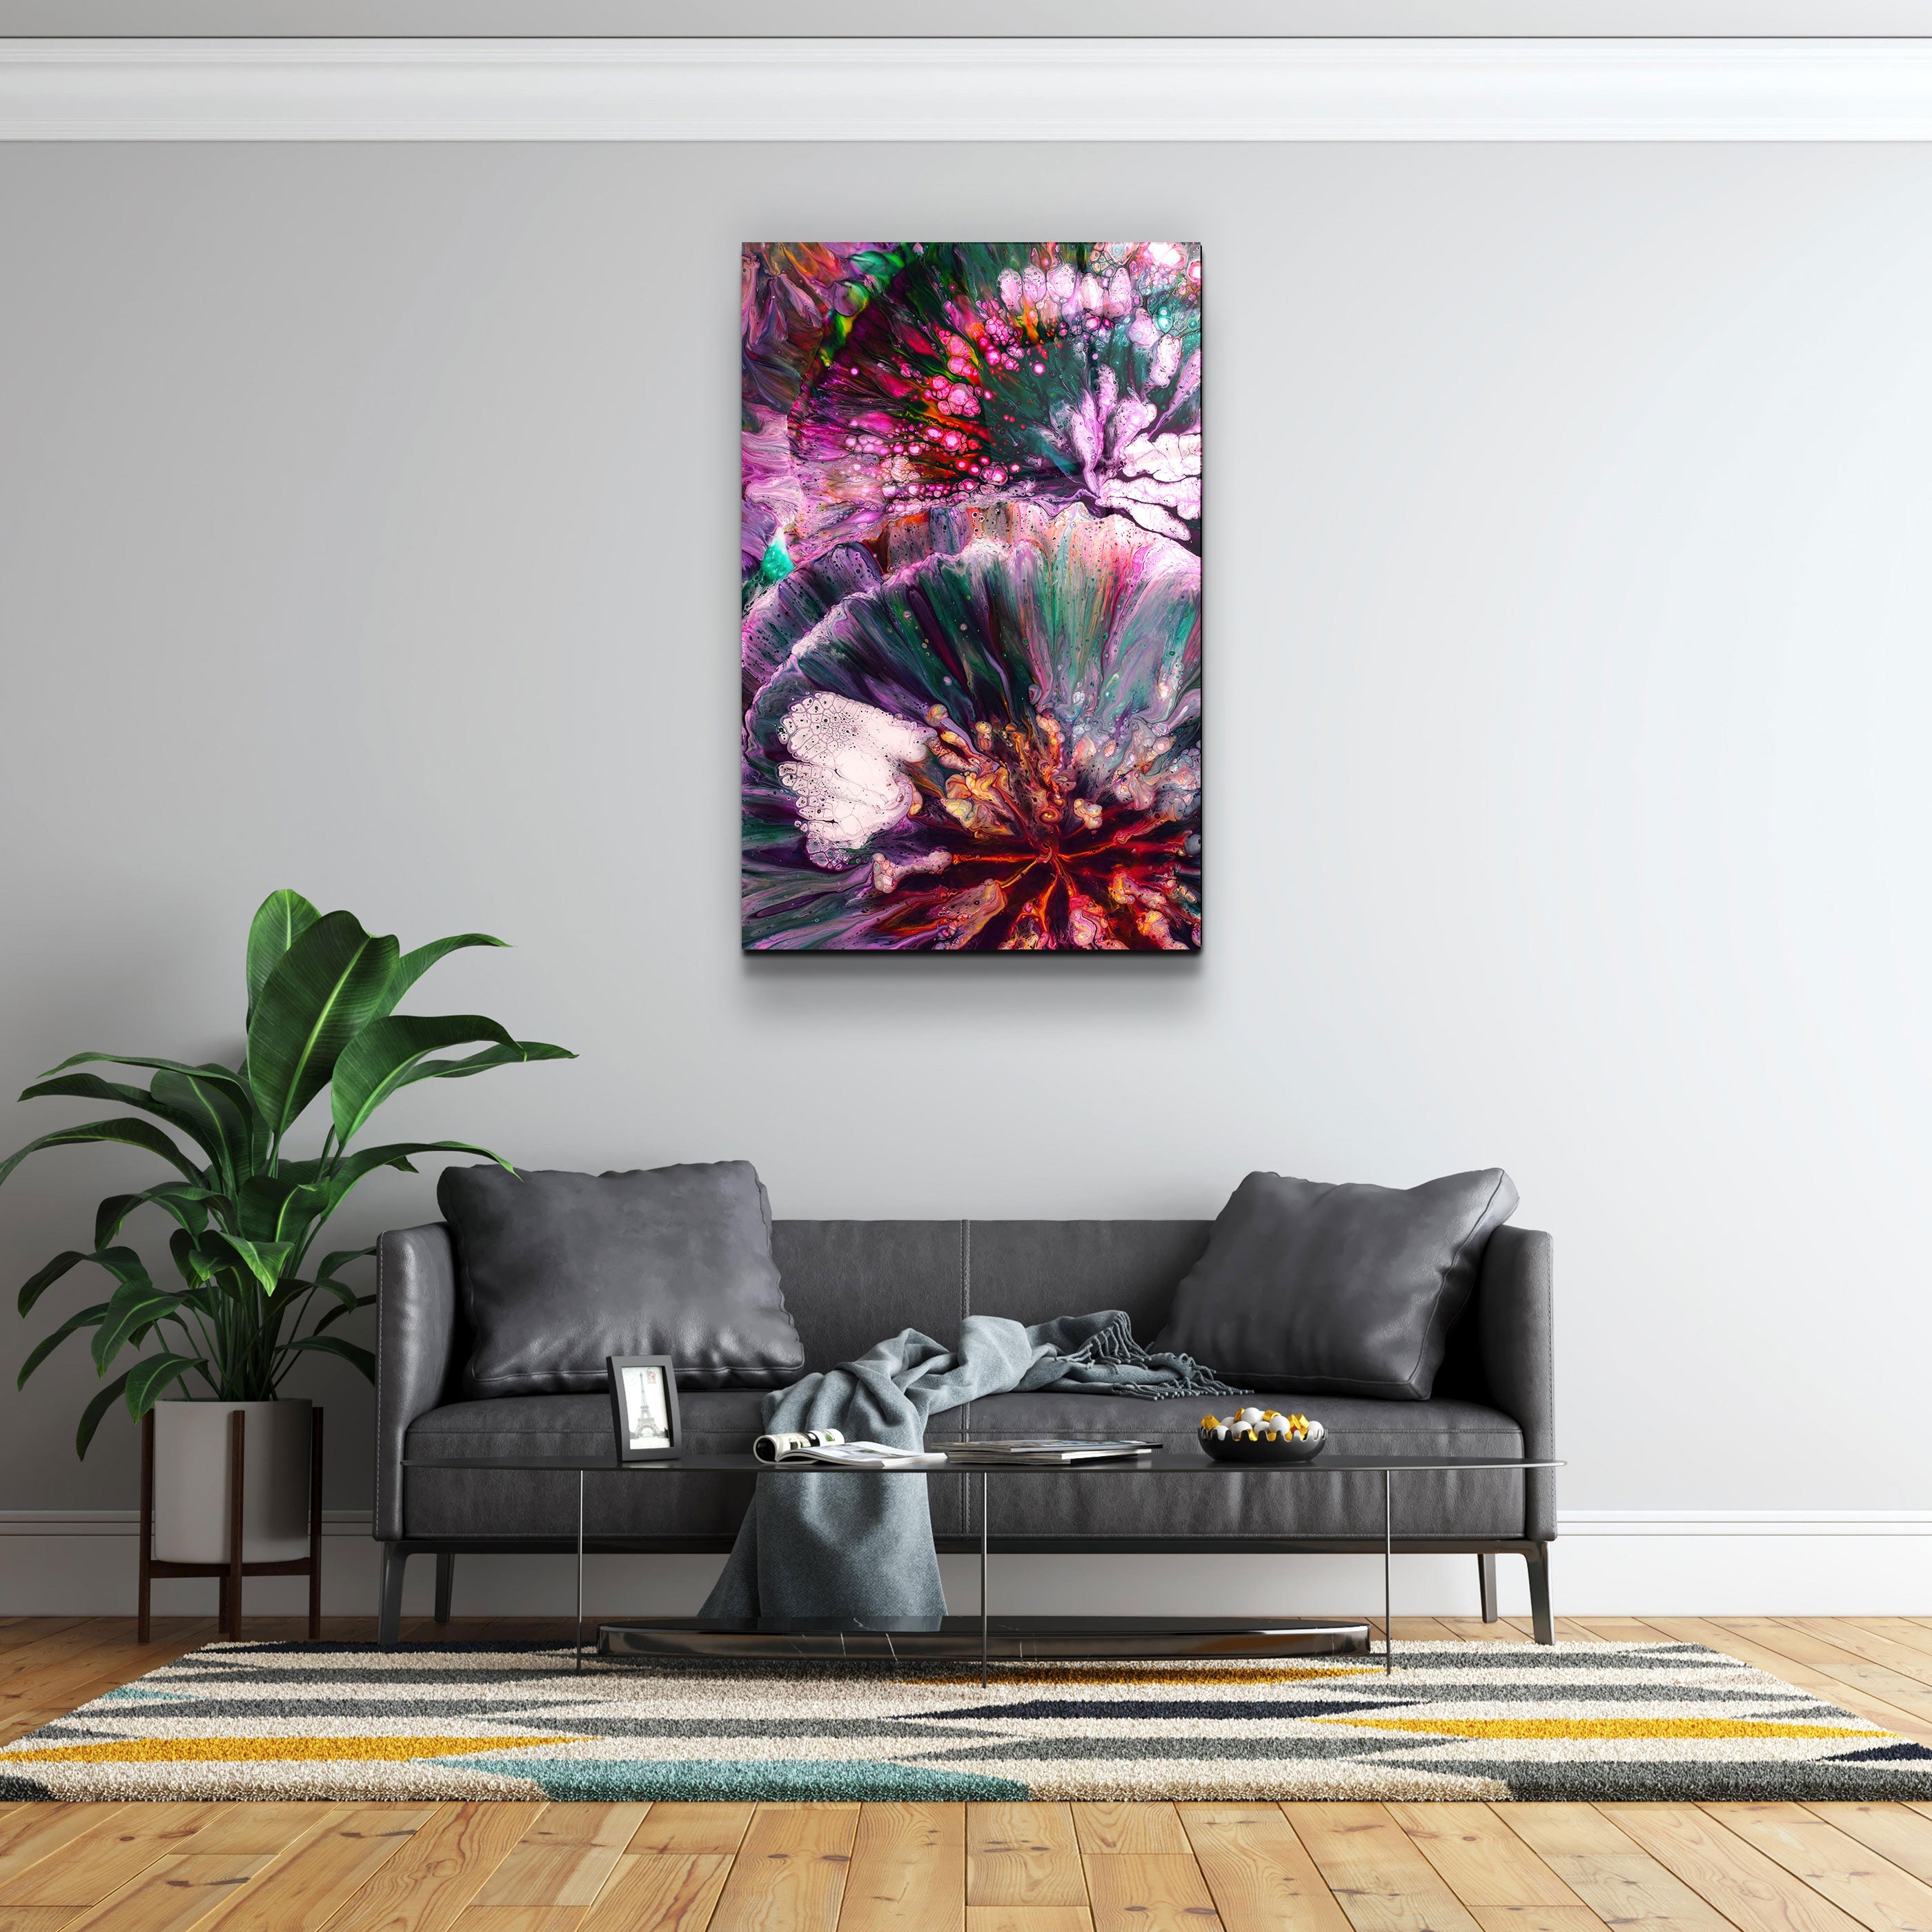 ・"Abstract Colorful Design"・Designer's Collection Glass Wall Art